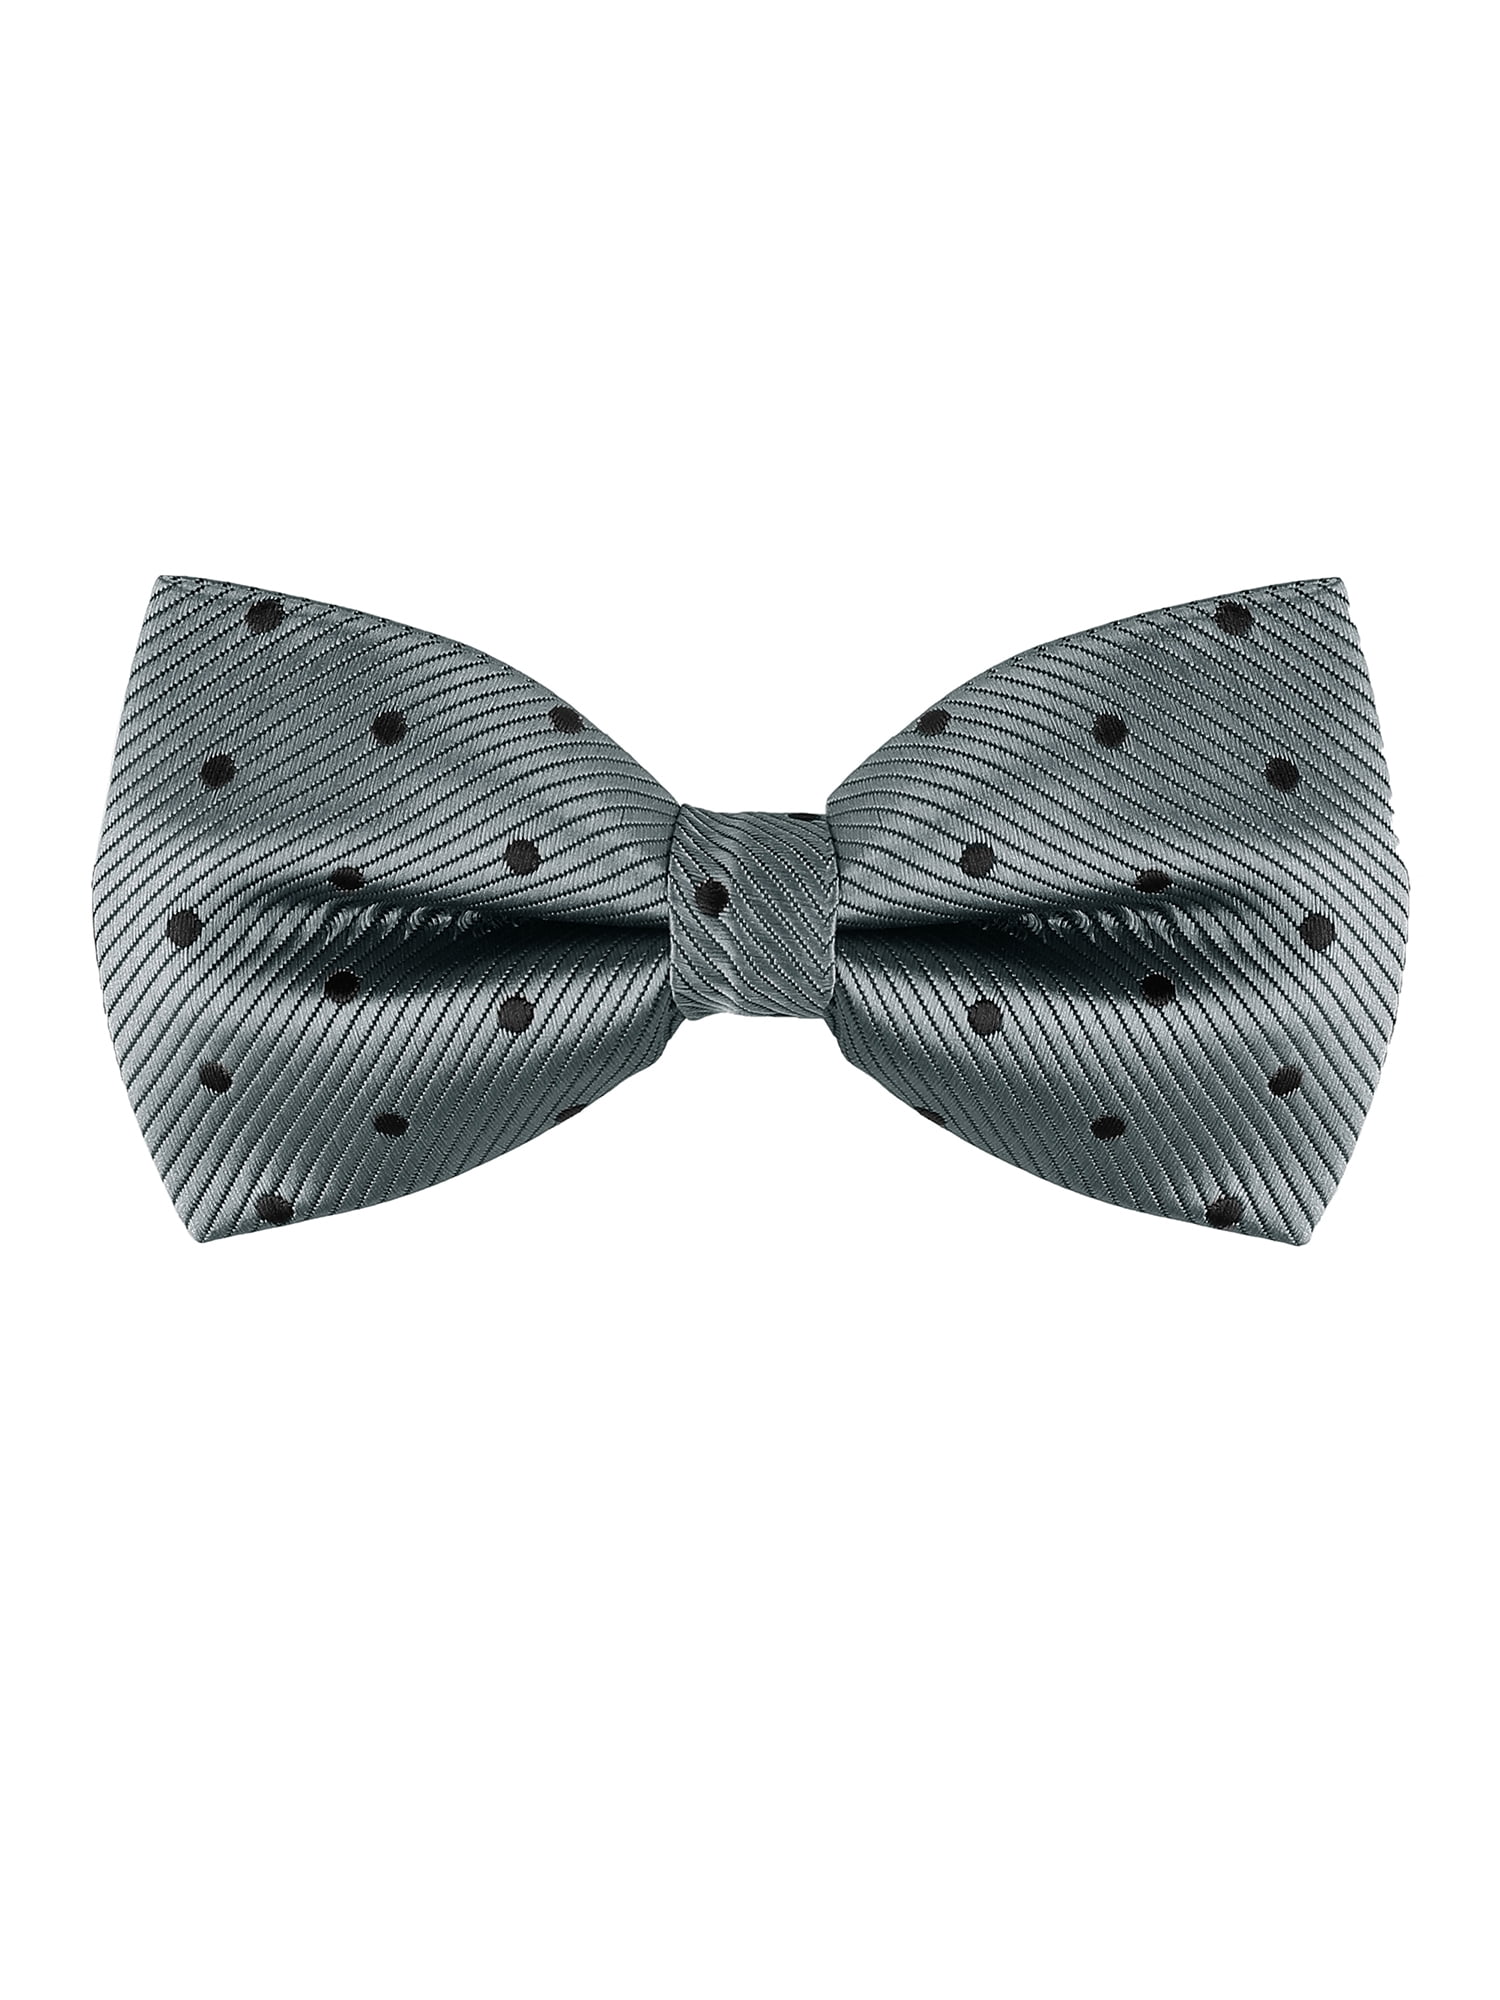 Men's Classic Elegant Striped Navy Blue Pre-Tied Fashionable Formal Bow Tie 